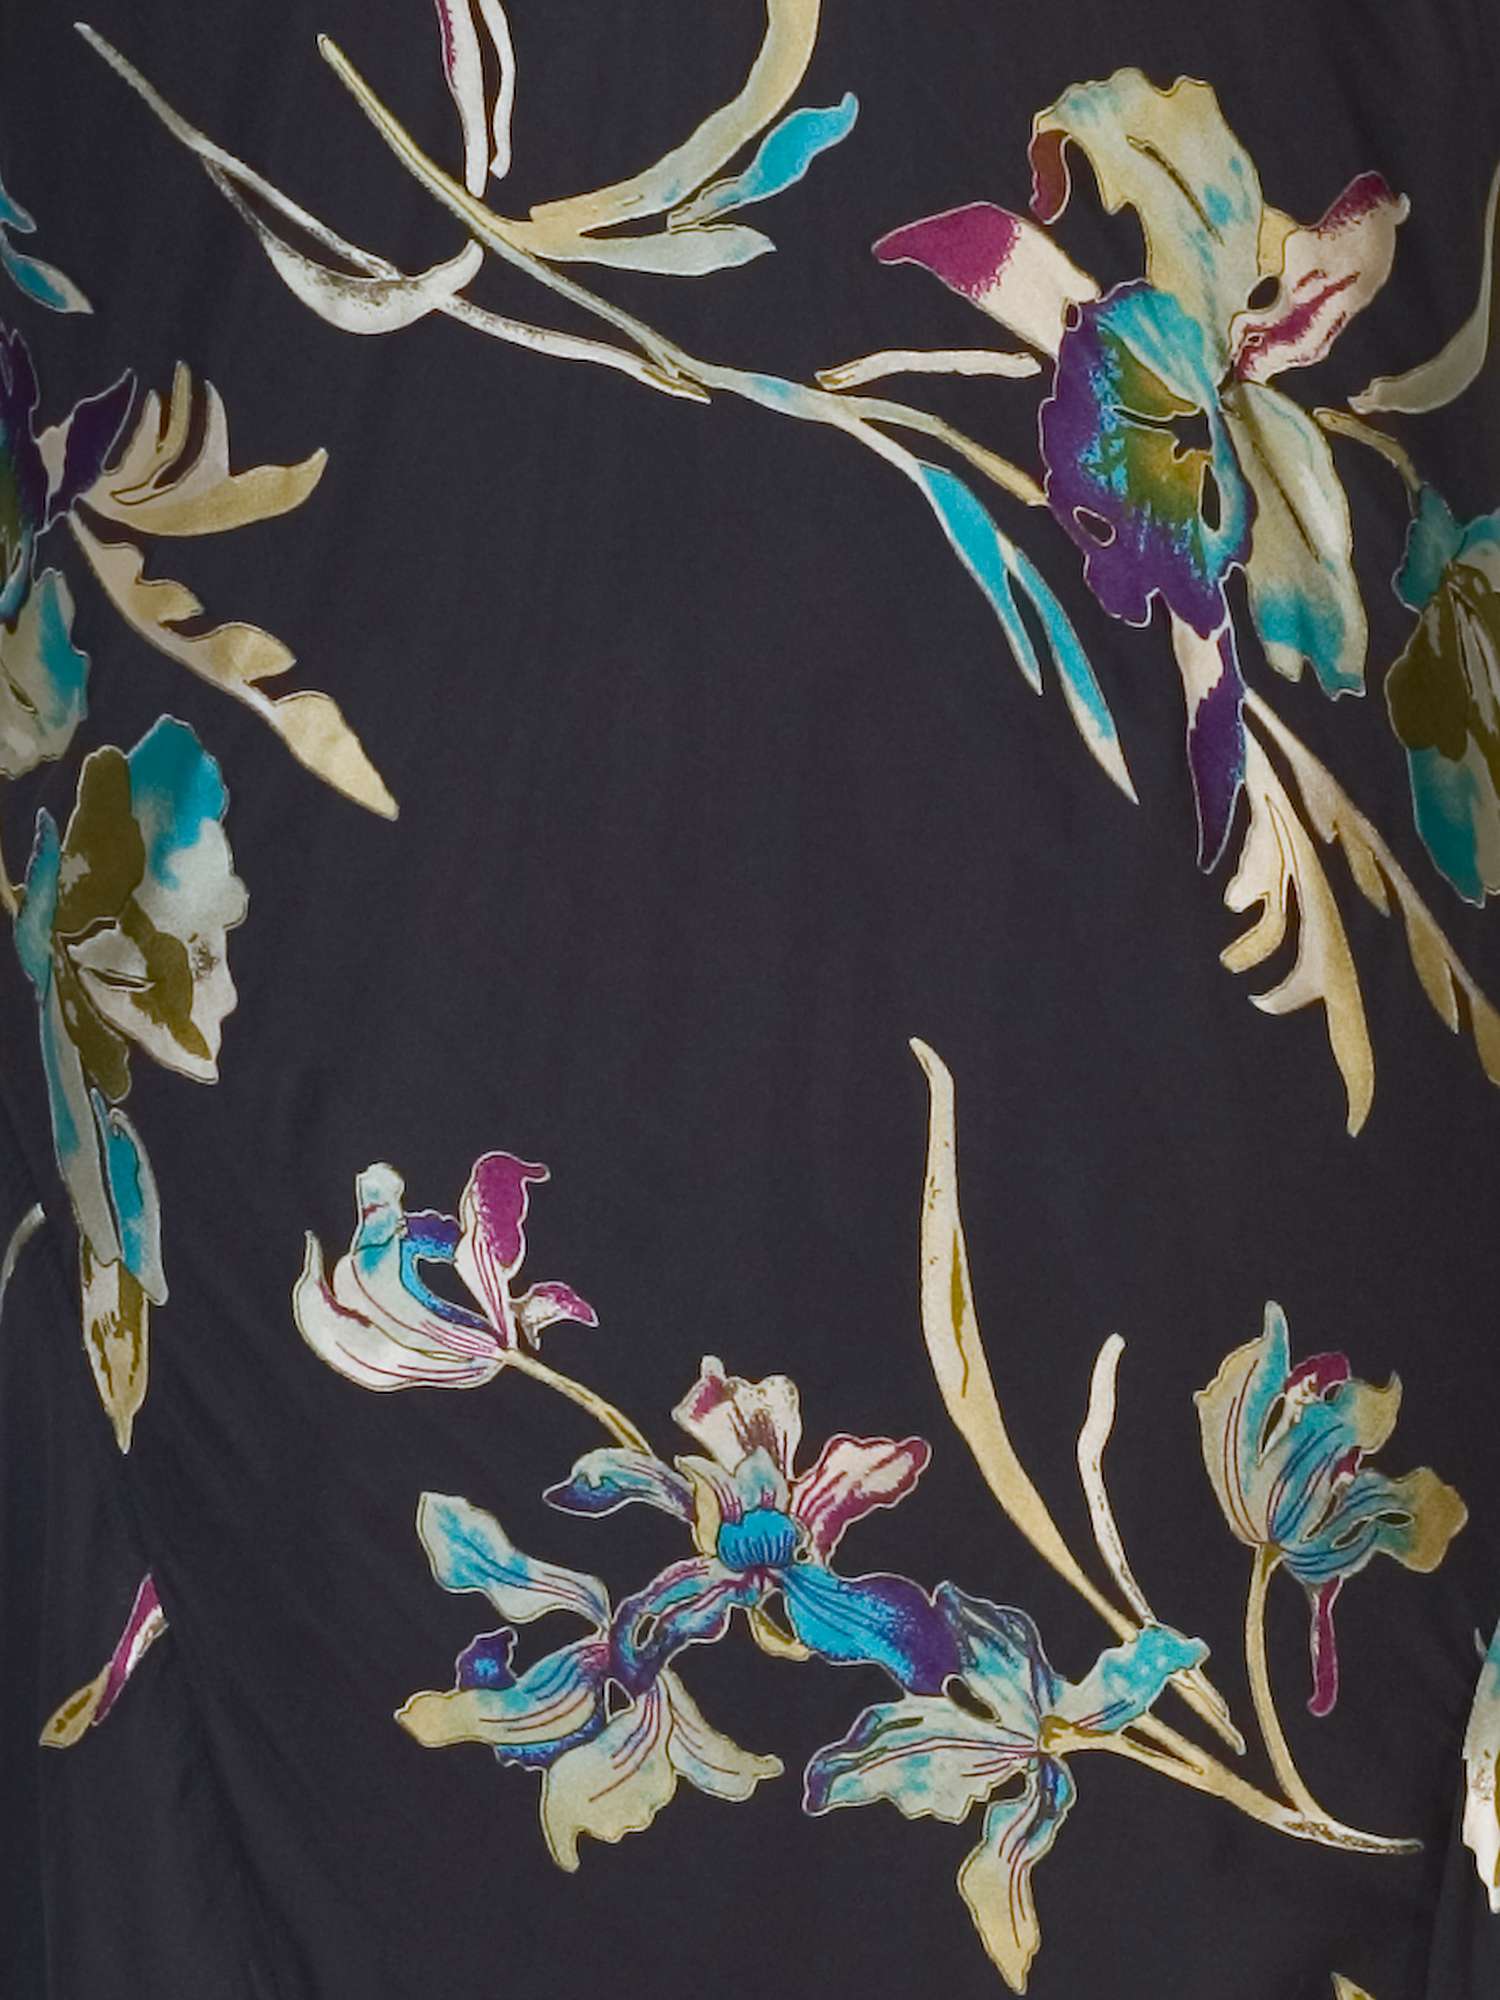 Buy chesca Devoree Floral Print Midi Dress, Pewter/Turquoise Online at johnlewis.com